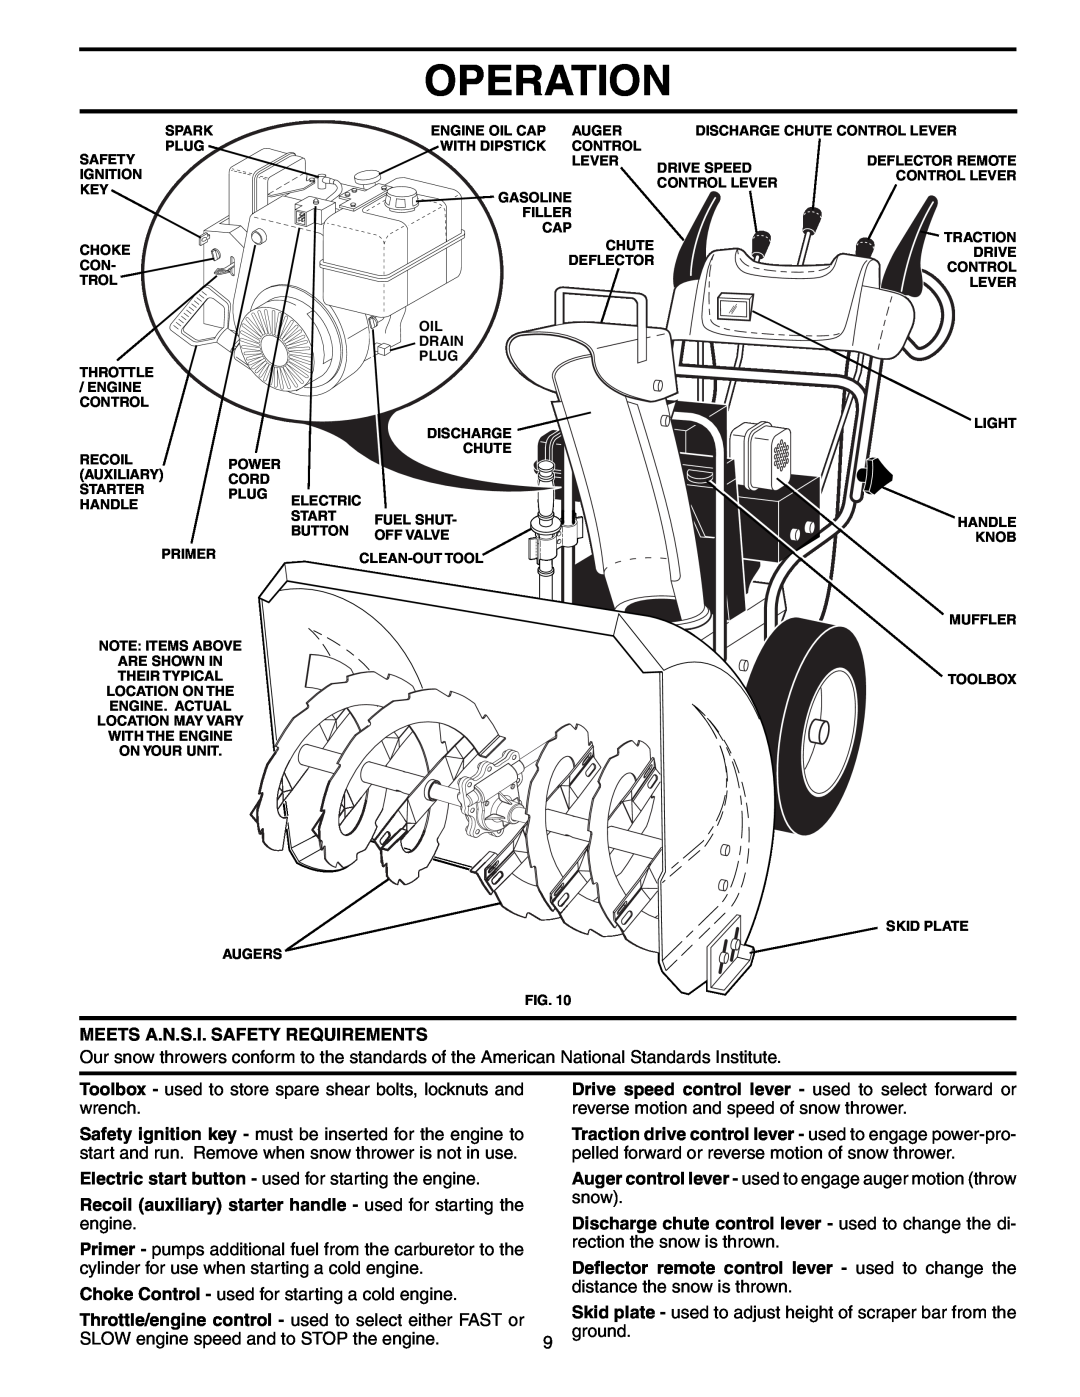 Poulan PO10527ESA owner manual Operation, Meets A.N.S.I. Safety Requirements 